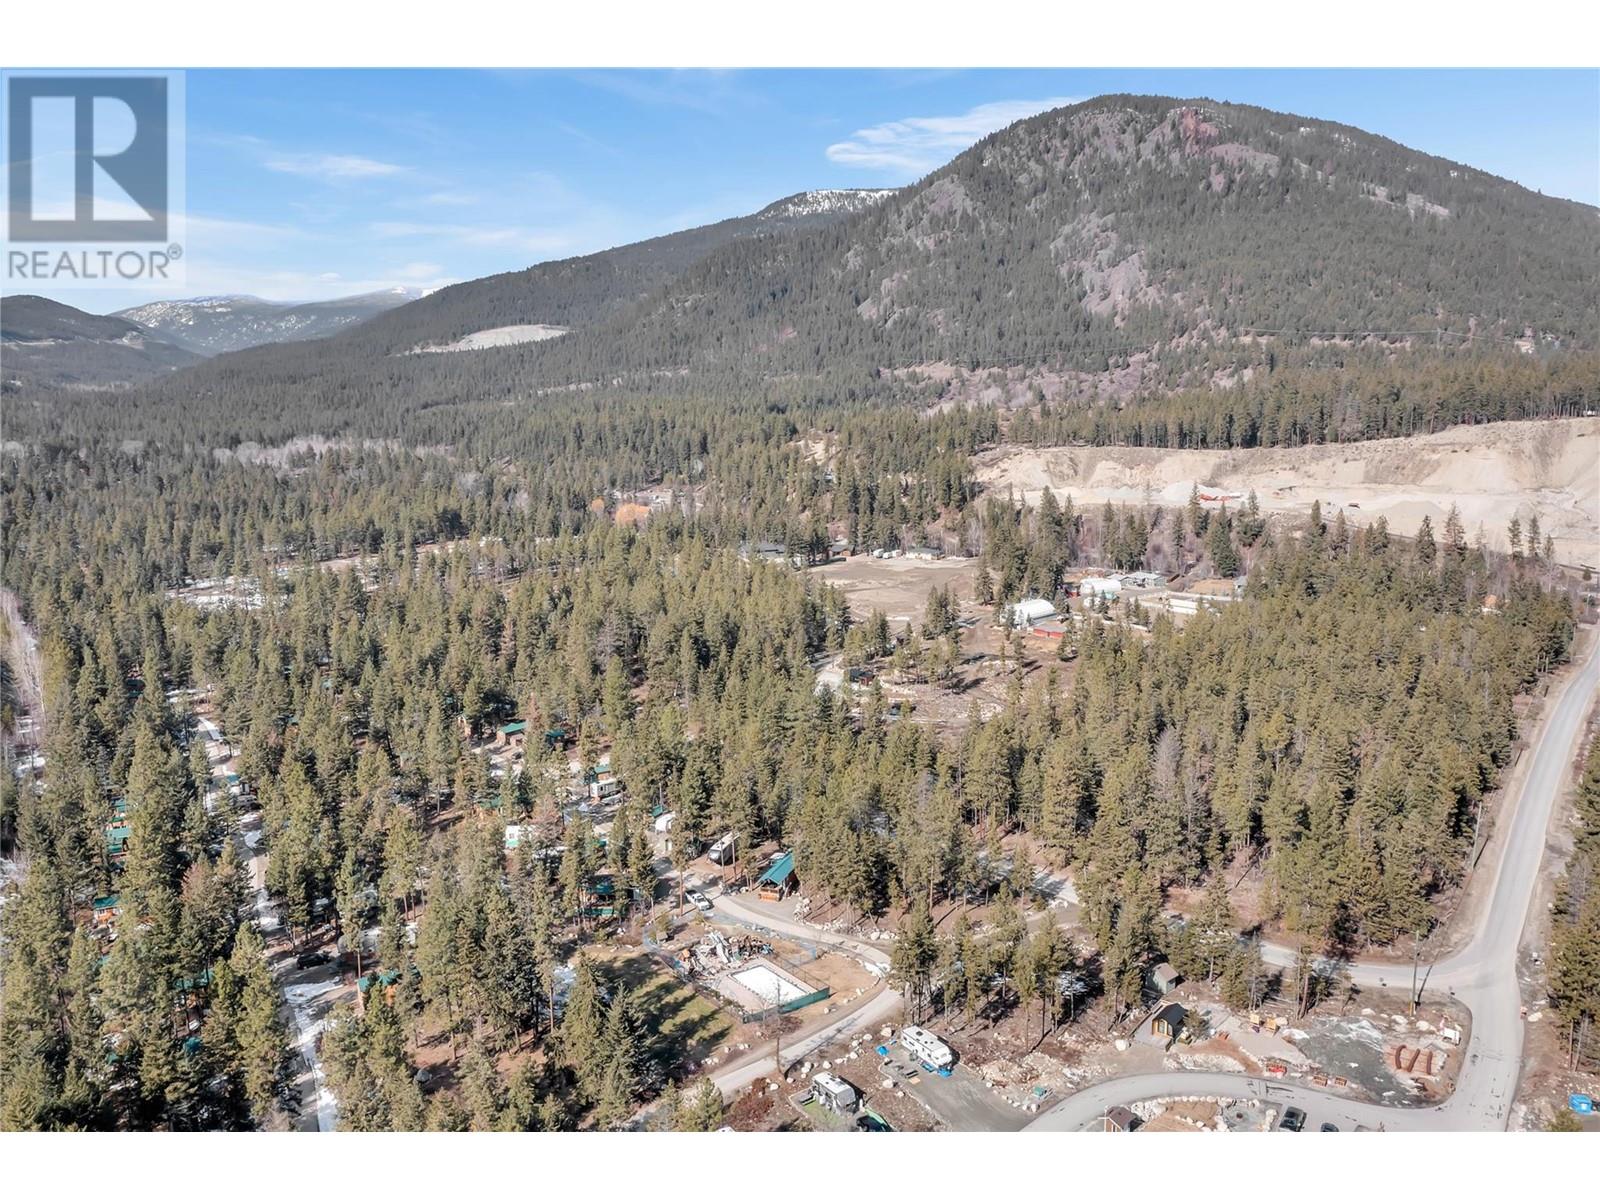 17 4835 Paradise Valley Drive, Peachland